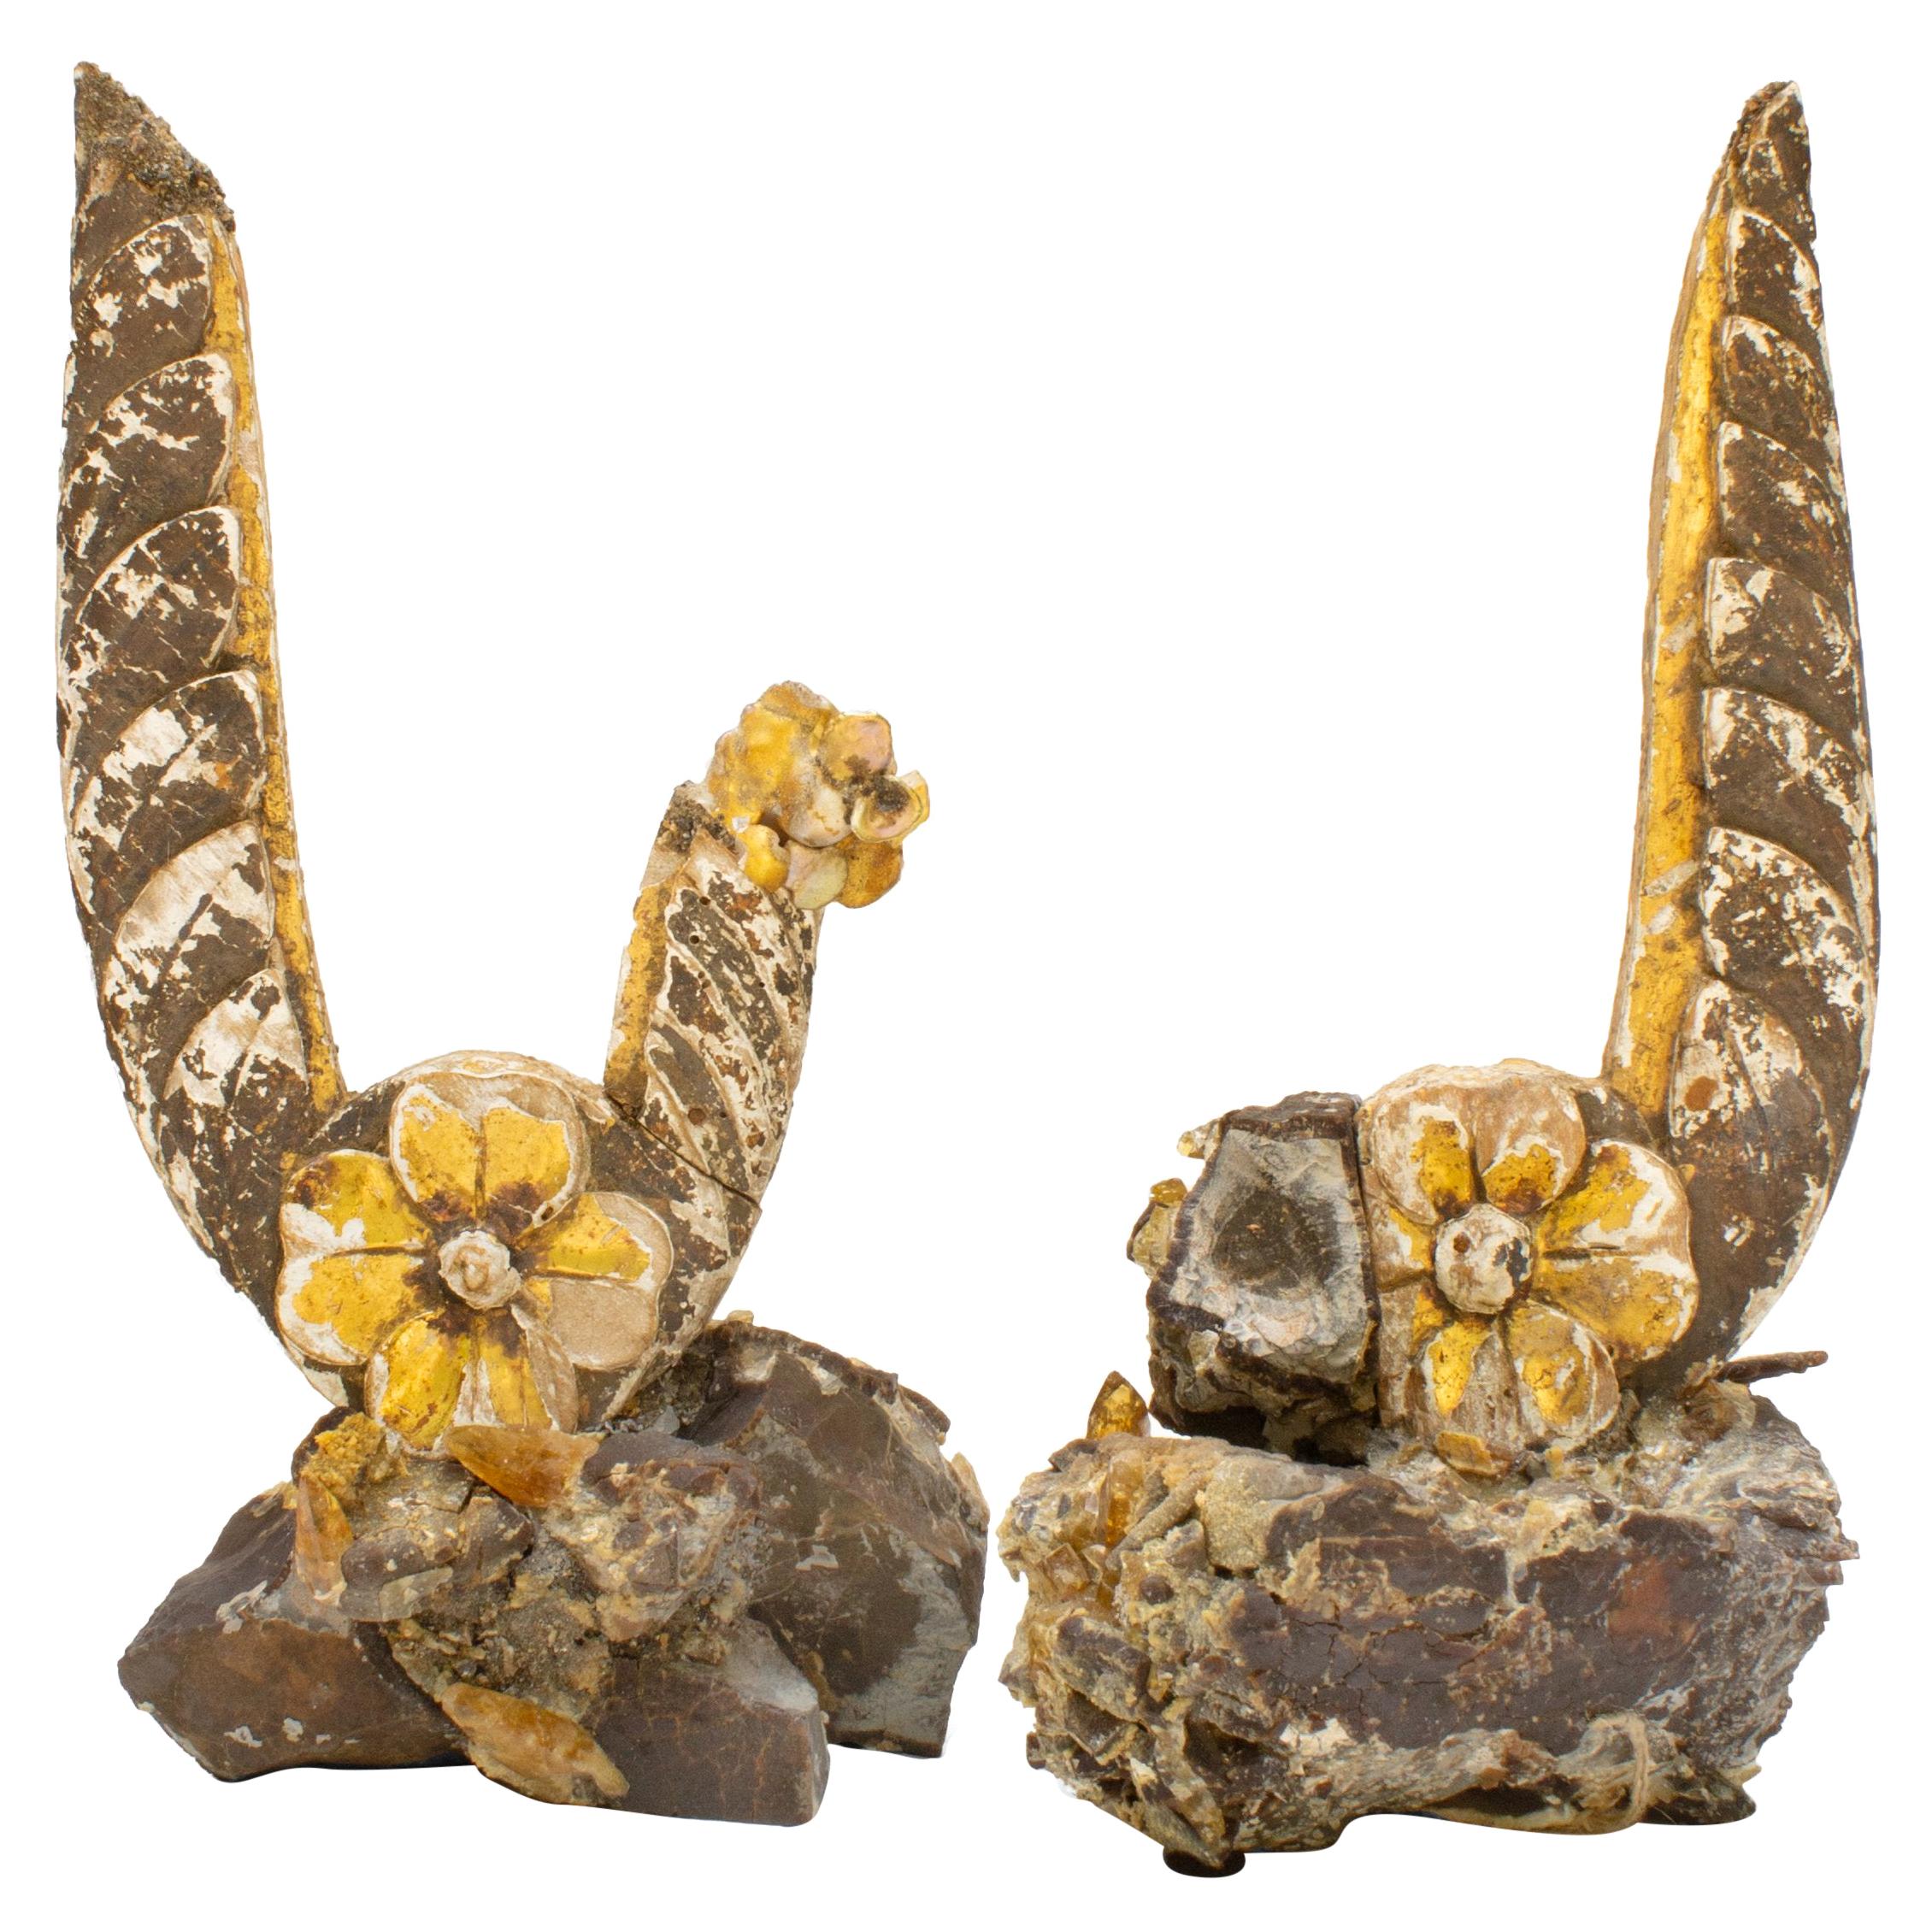 Pair of 18th Century Italian Fragments with Gold Flower Reliefs & Golden Barite 